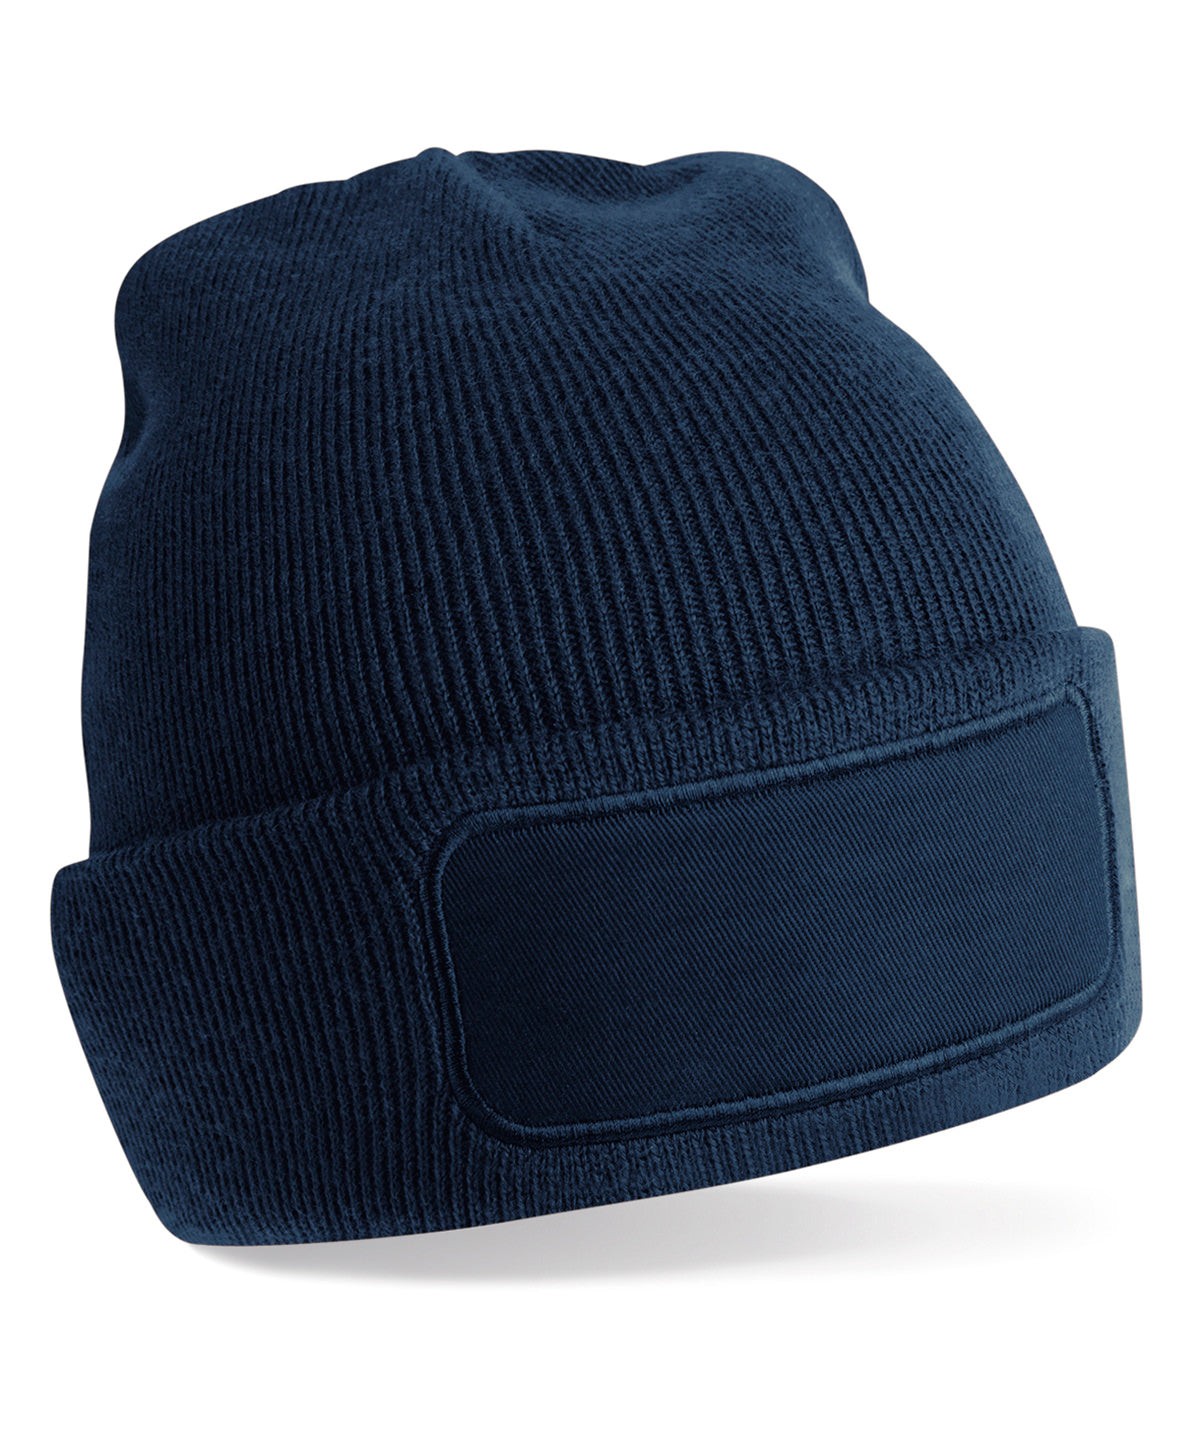 Personalised Hats - Navy Beechfield Recycled original patch beanie